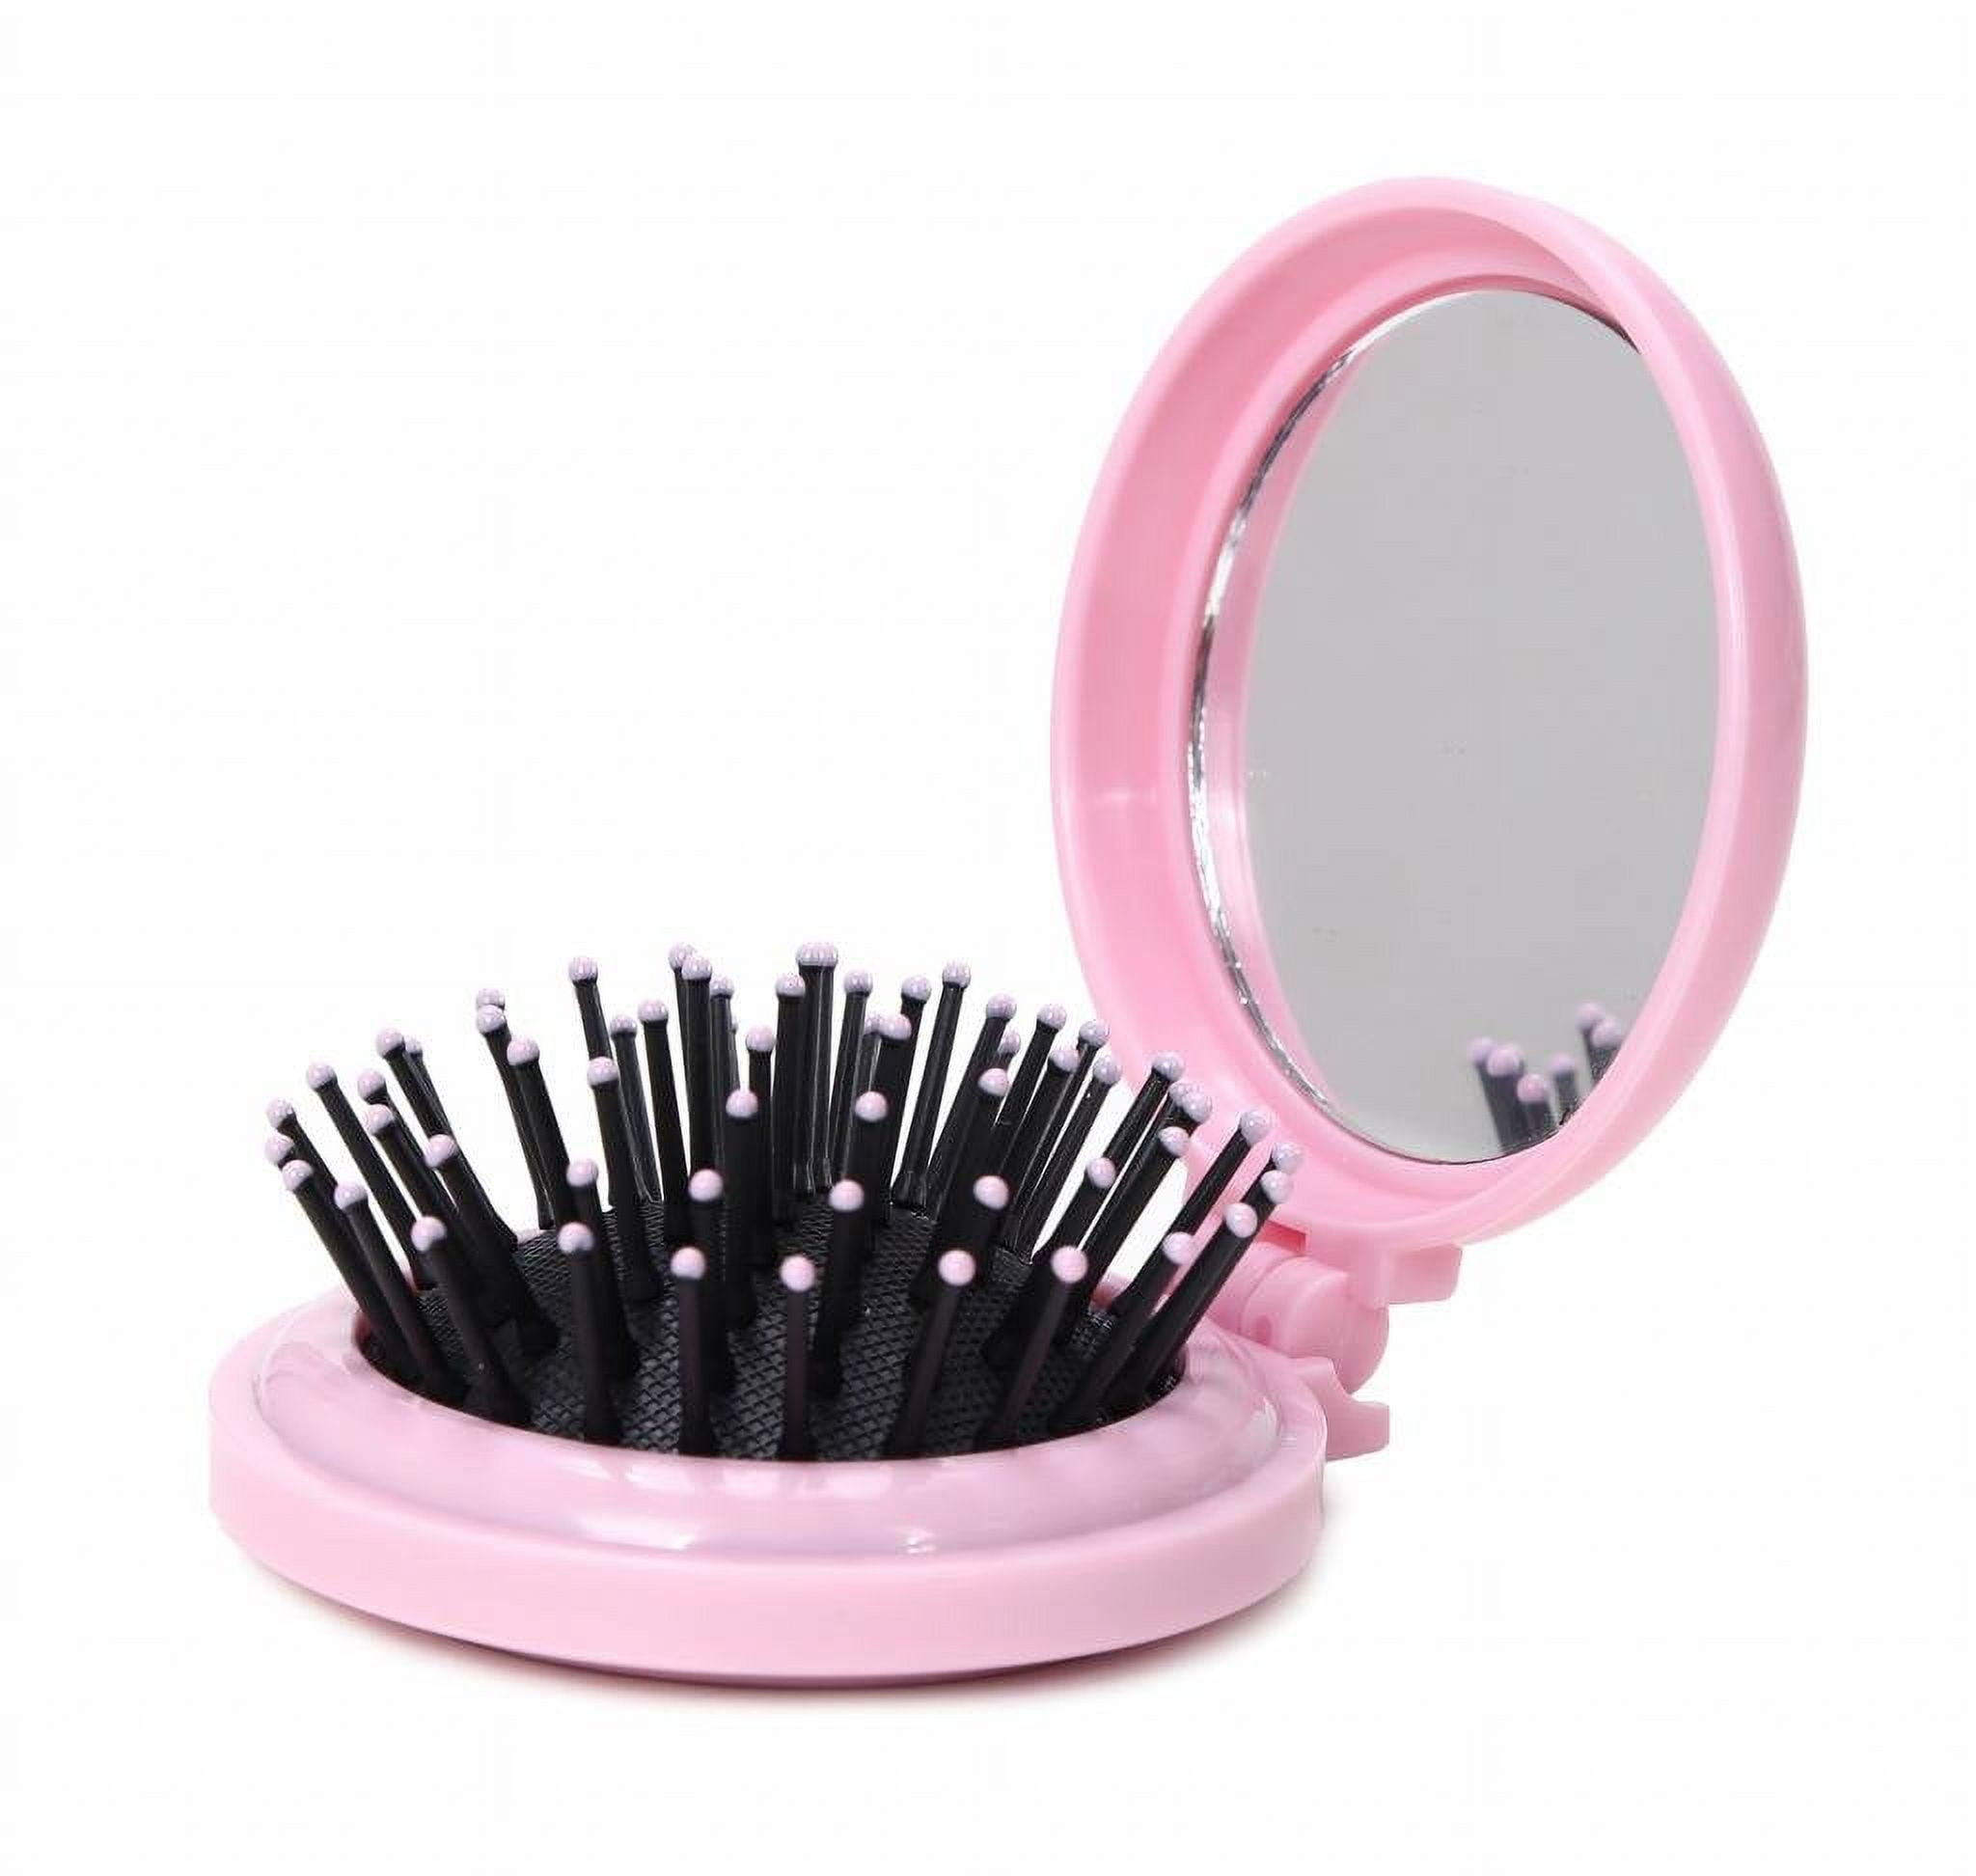 Buy AKADO Travel Hair Brush with Mirror, Compact Mirror with Mini Hair Brush  Kit, Folding Hairbrush for Women, Small Hair Comb with Mirror Portable Size  in Purse or Pocket, 1pc, Multi Color.